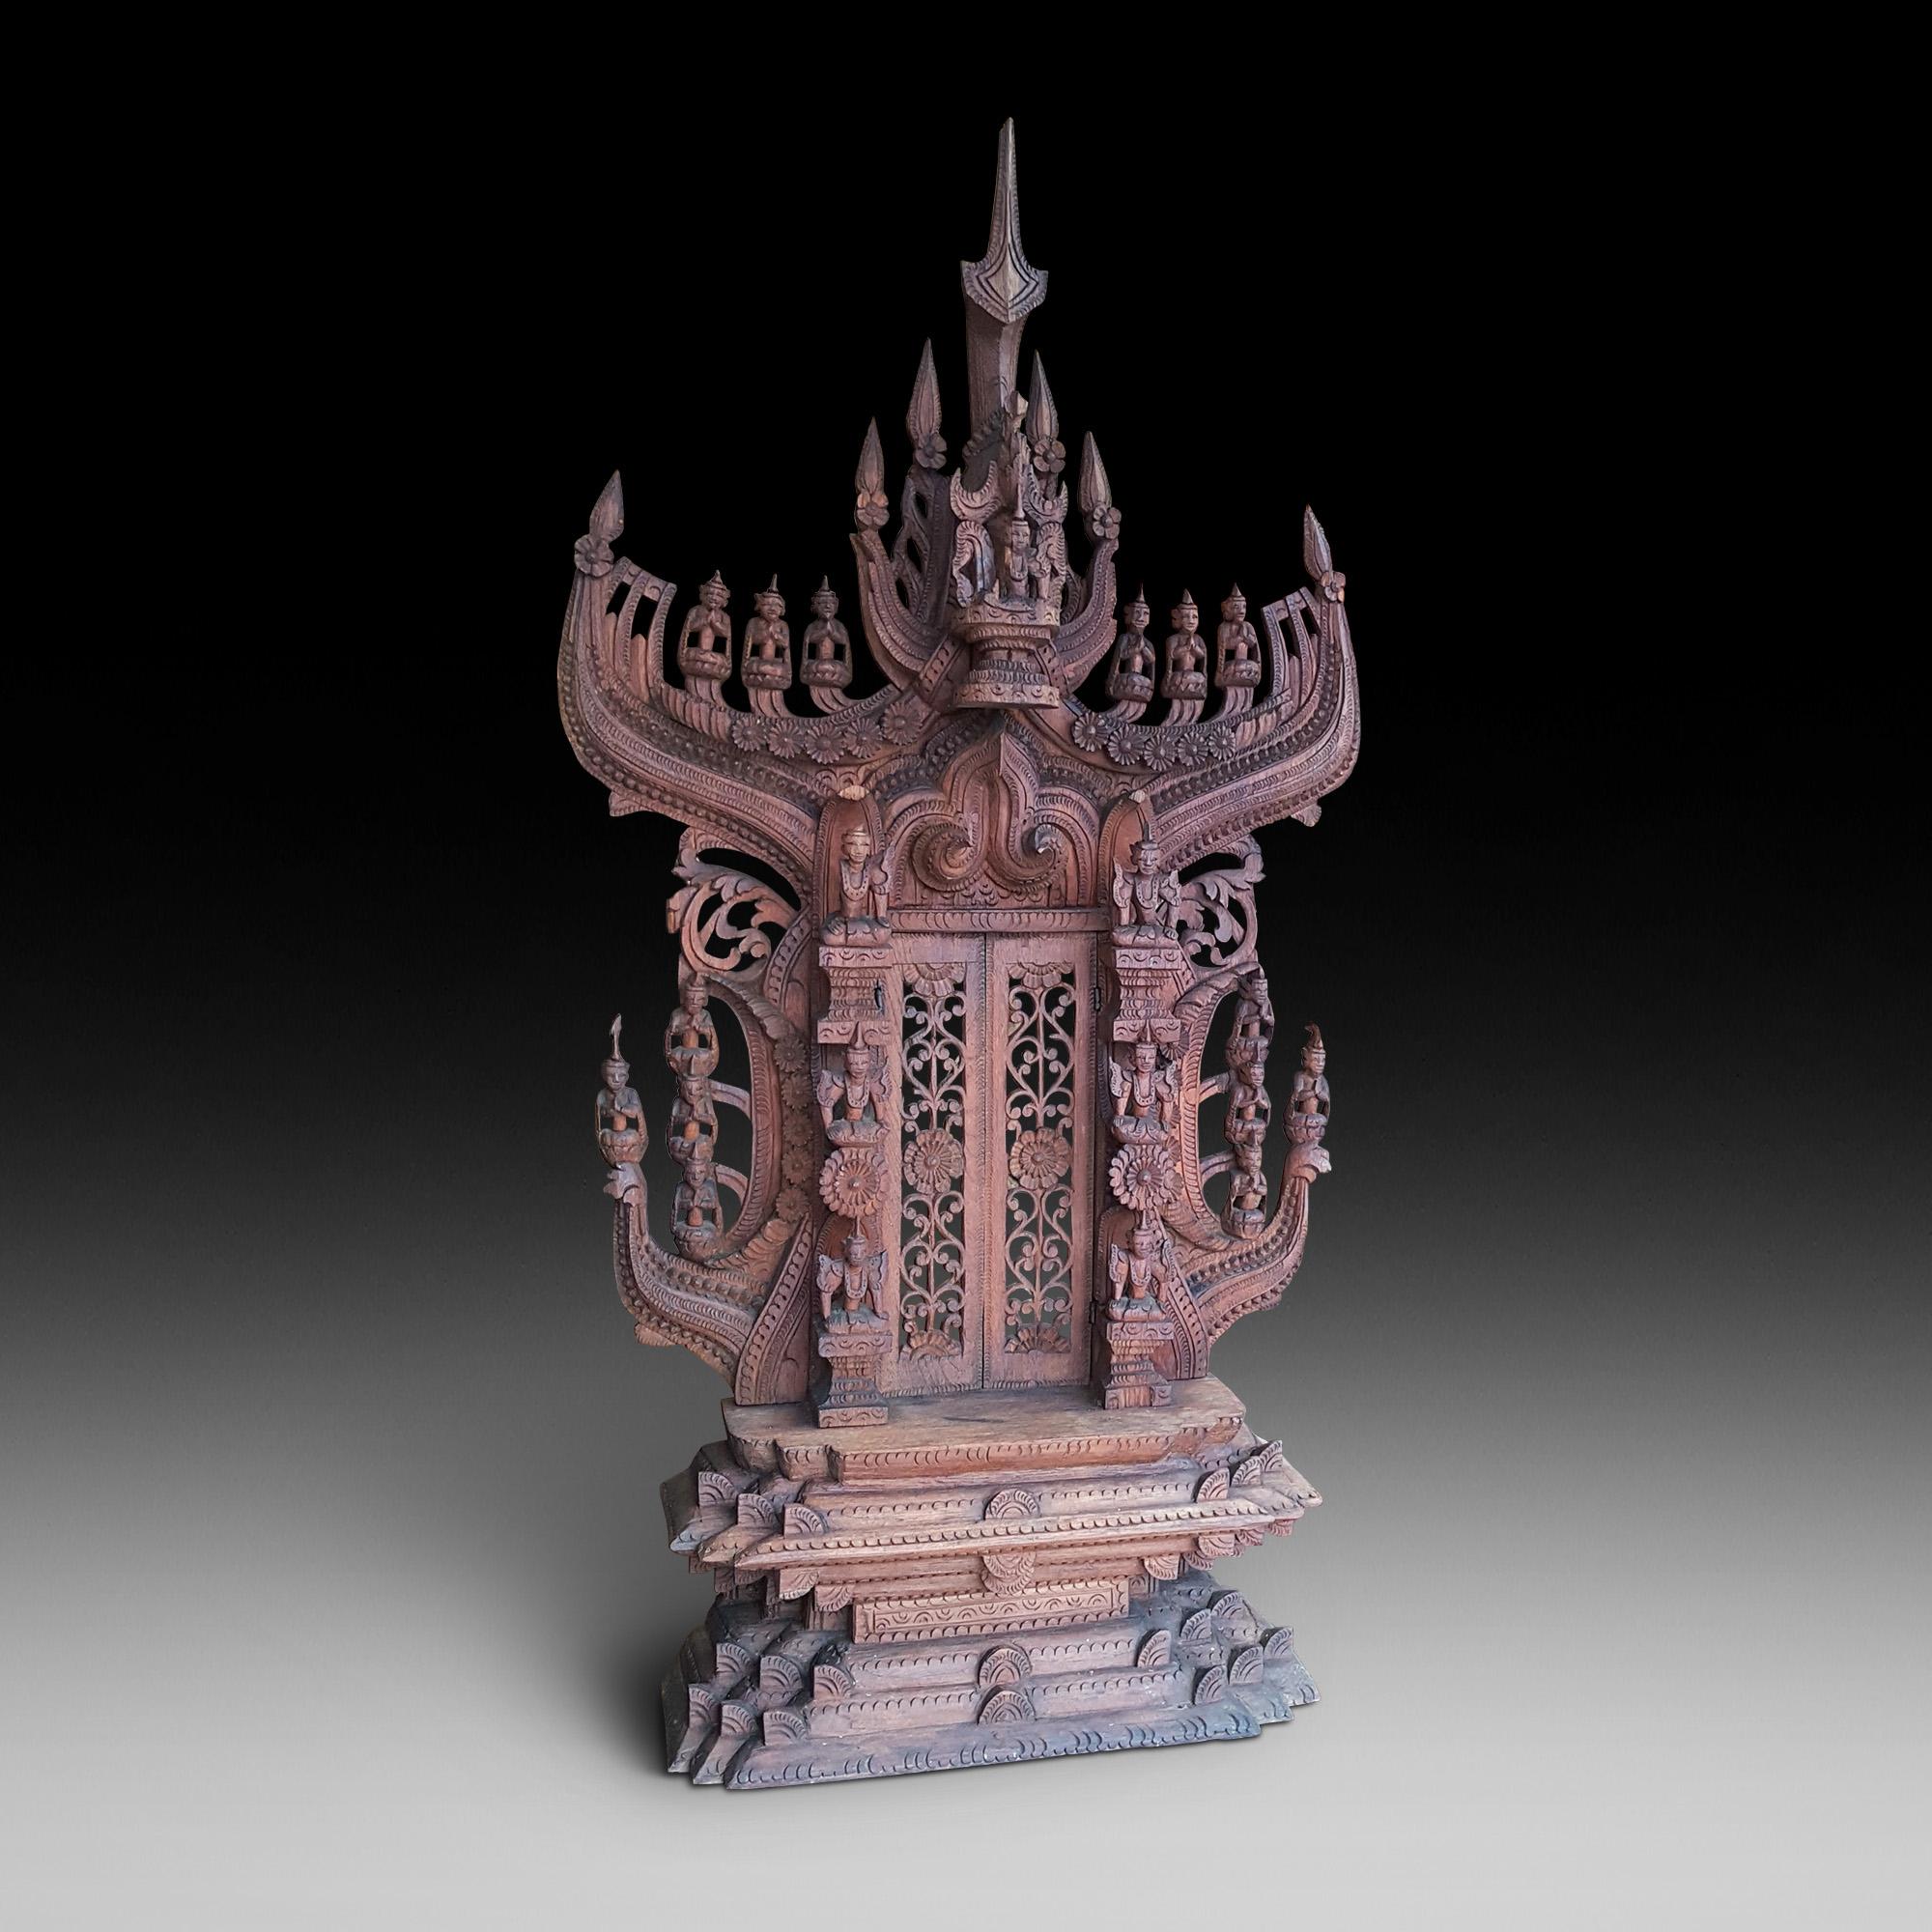 Set of late 19th century Indonesian wood carvings of Budhist temple, Shrine, Guardian and calling gong flanked by a pair of Guardians
Gong 18